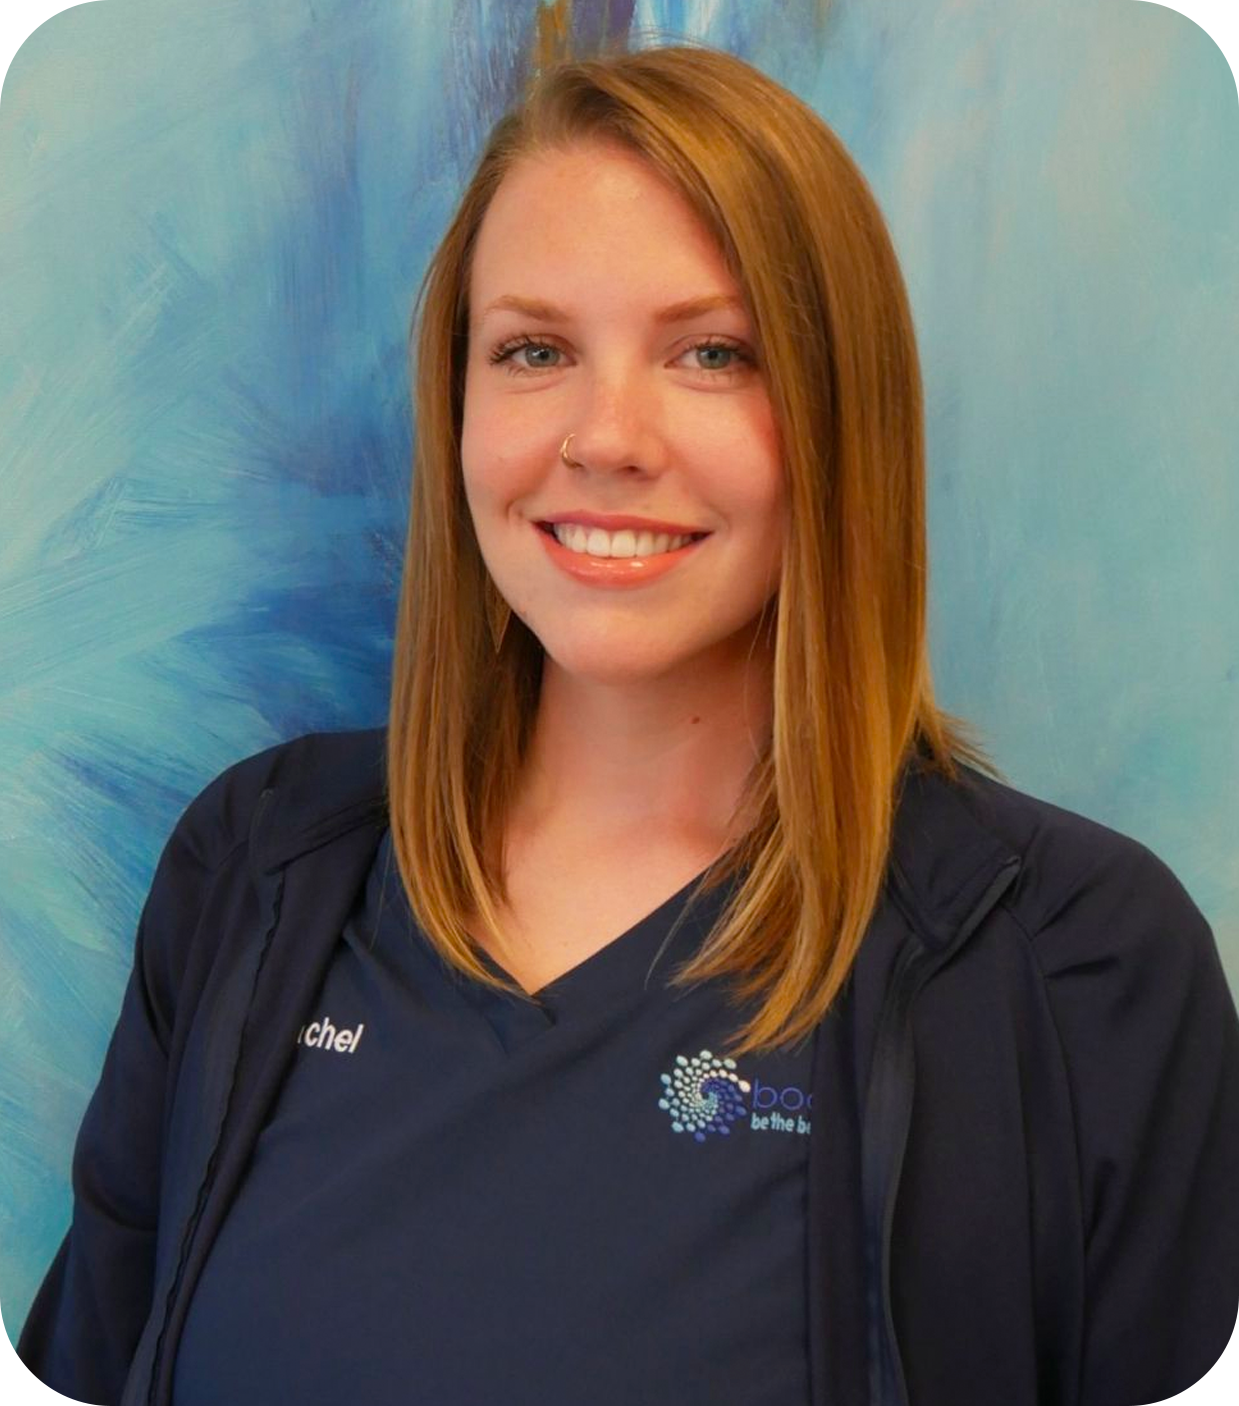 Introducing Bodenvy CoolSculpting & Weight Loss Tulsa's Owner and General Manager: Rachel Kutz!